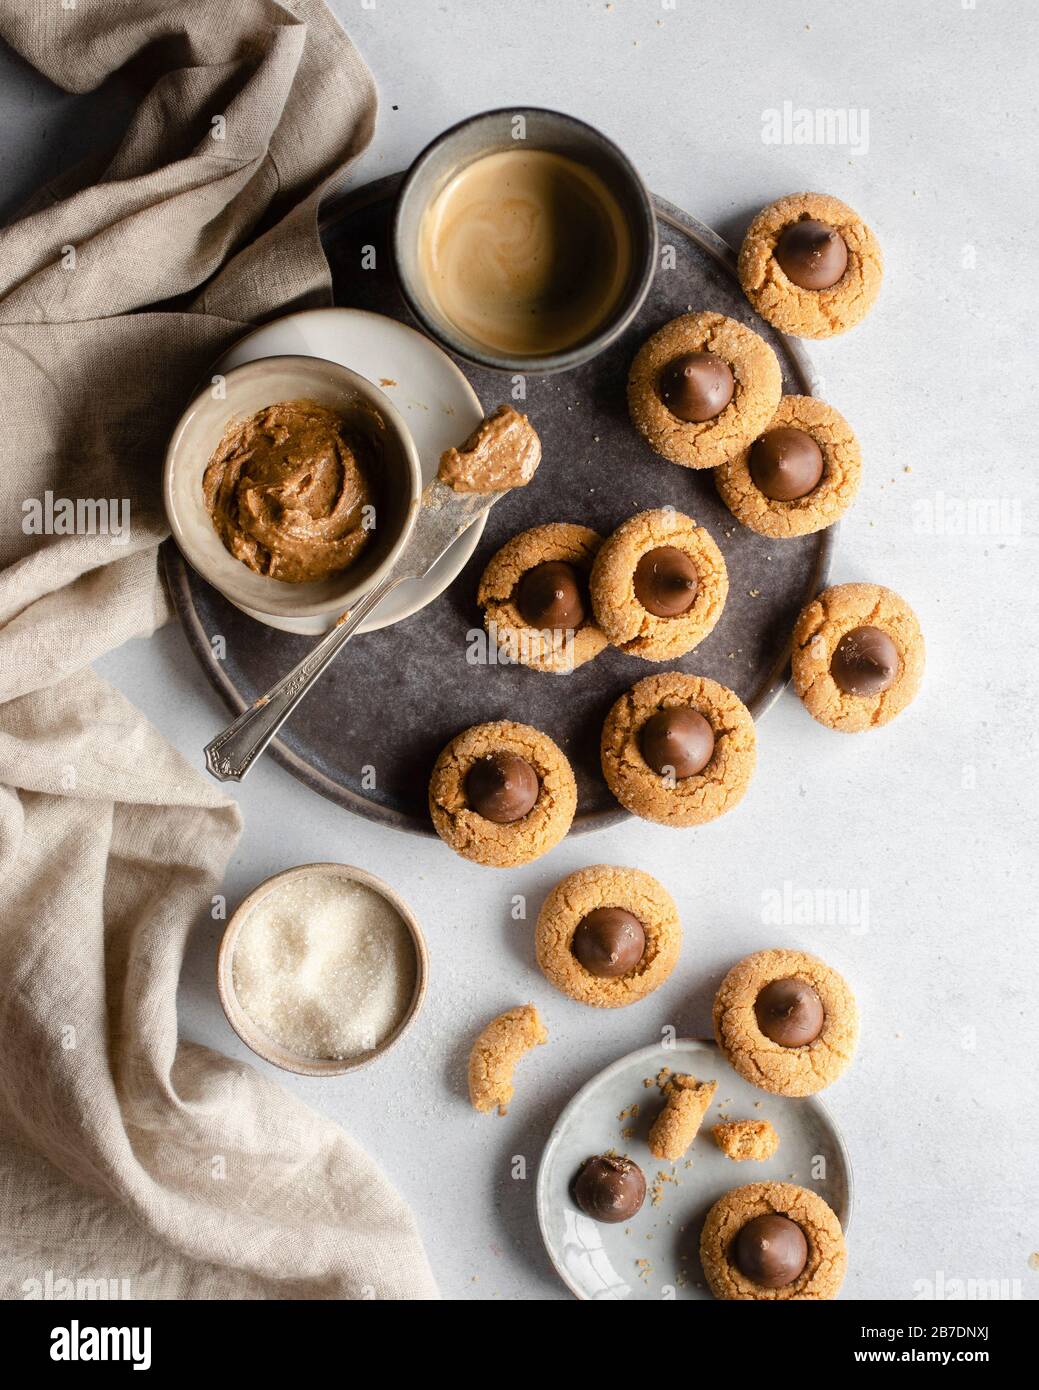 Peanut butter in a pinch bowl on a dark grey plate surrounded by chocolate kisses cookies Stock Photo